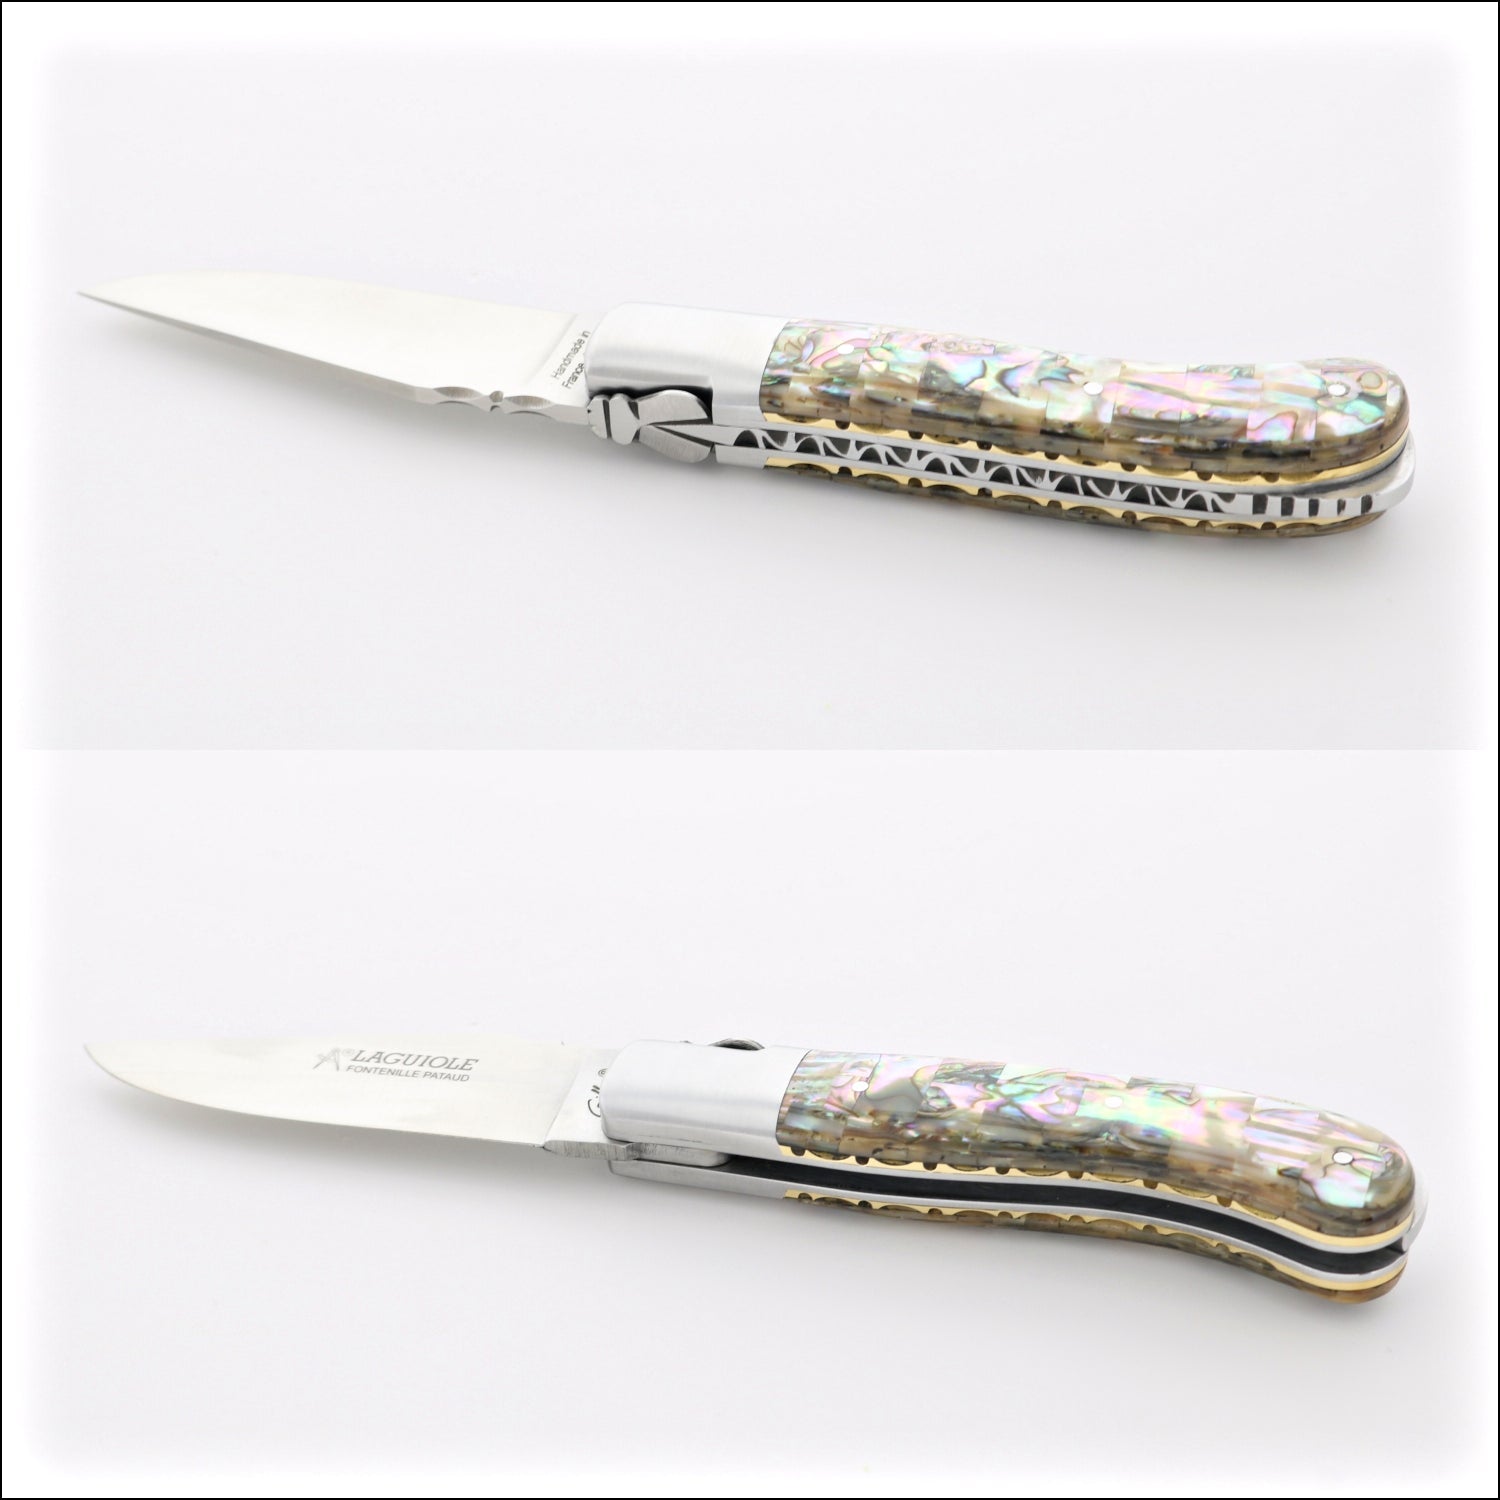 Laguiole Gentleman's Knife Guilloche - Mother of Pearl